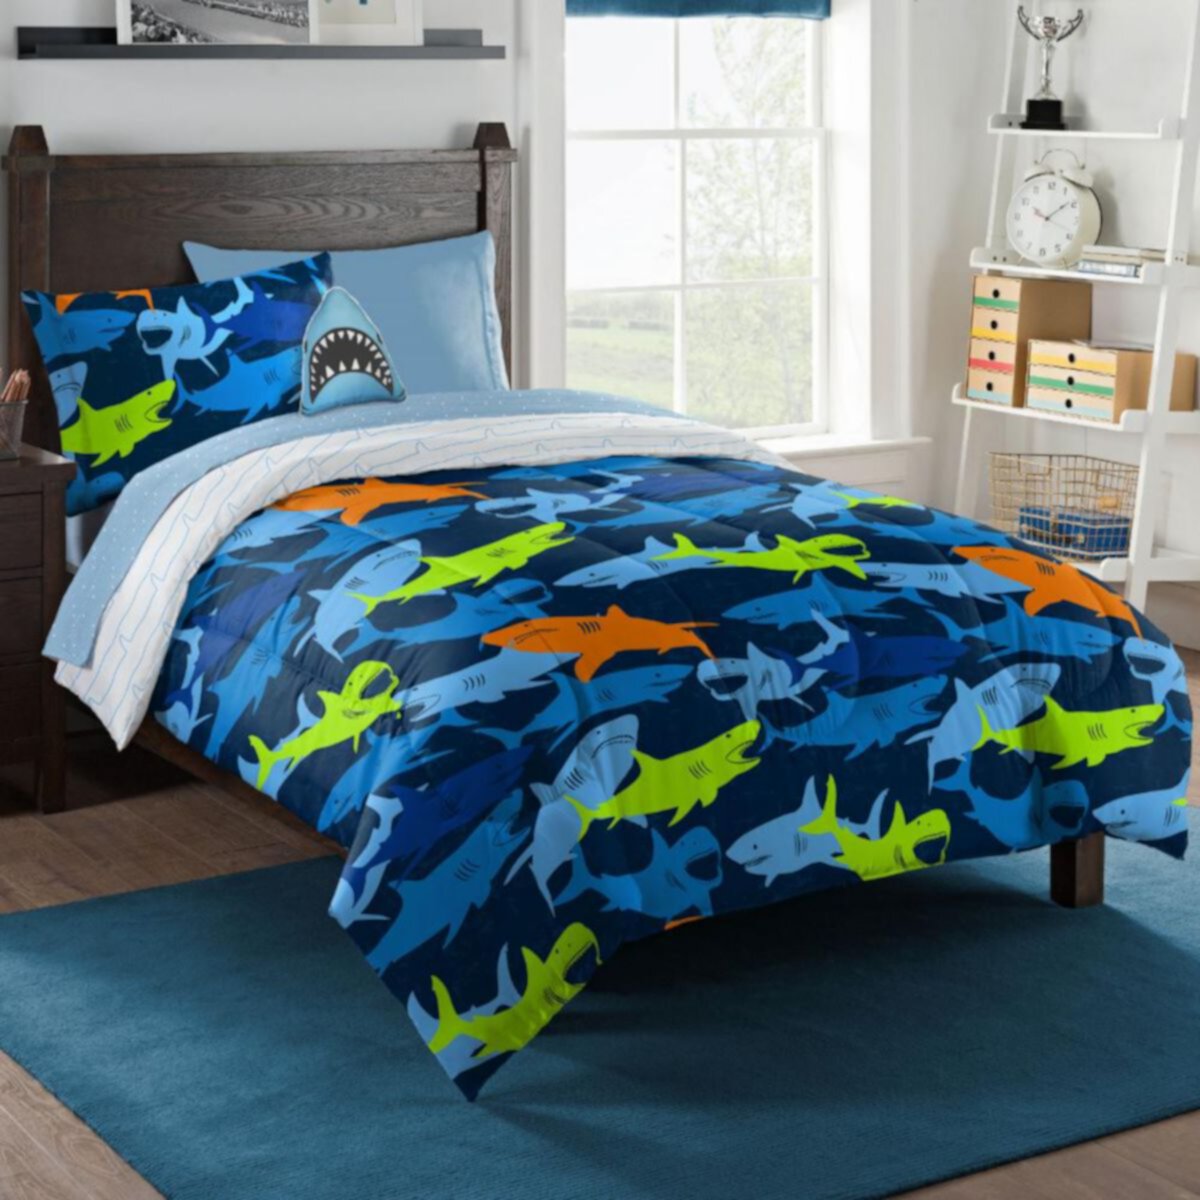 Luxuriant Home Kids Shark Adventure Bed in a Bag Set with Decorative Pillow Luxuriant Home